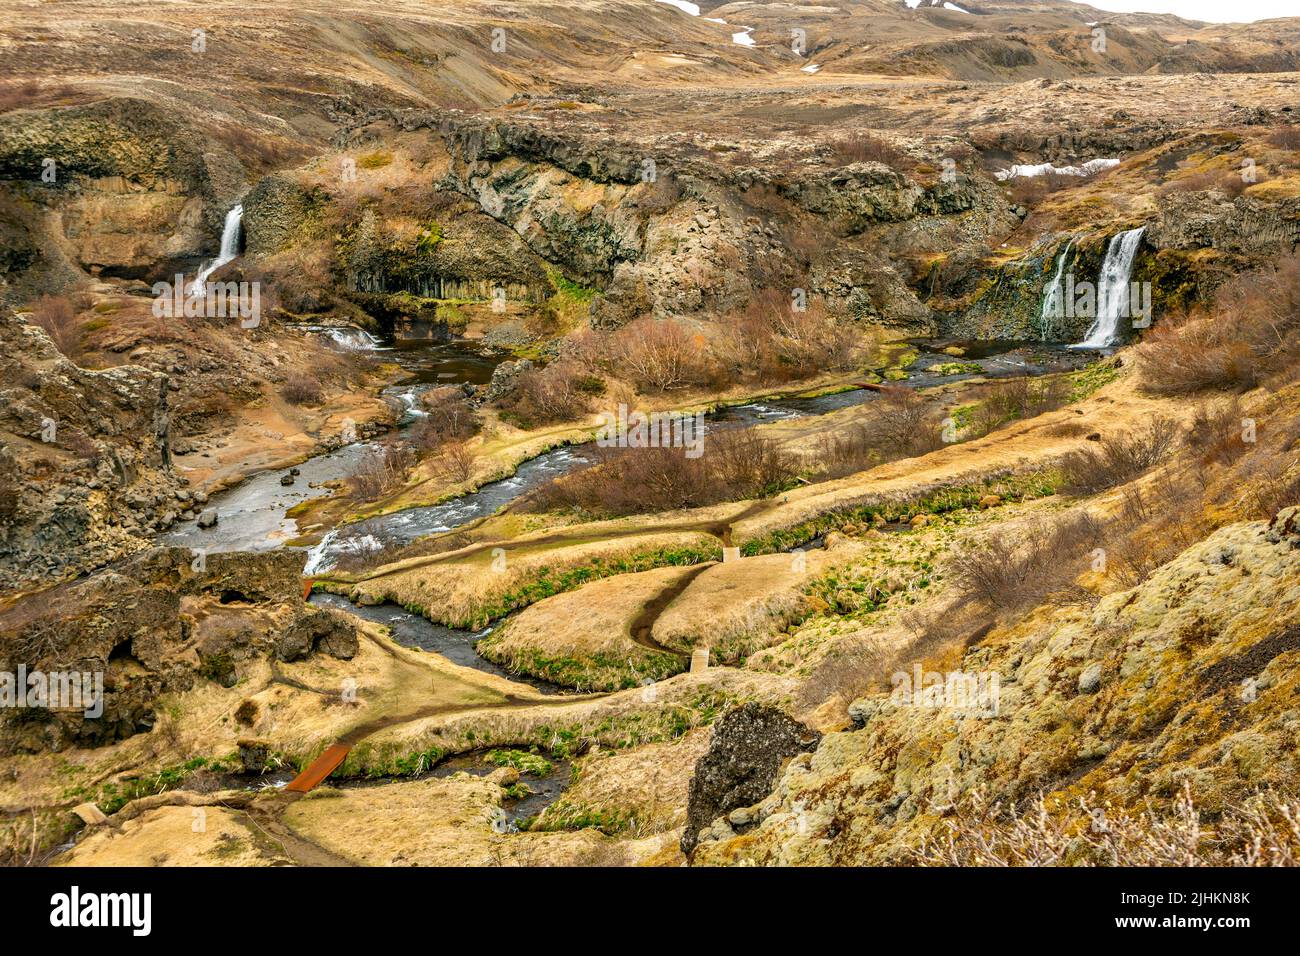 The small valley Gjáin with its small waterfalls, ponds, and volcanic structures is situated in the south of Iceland. Stock Photo